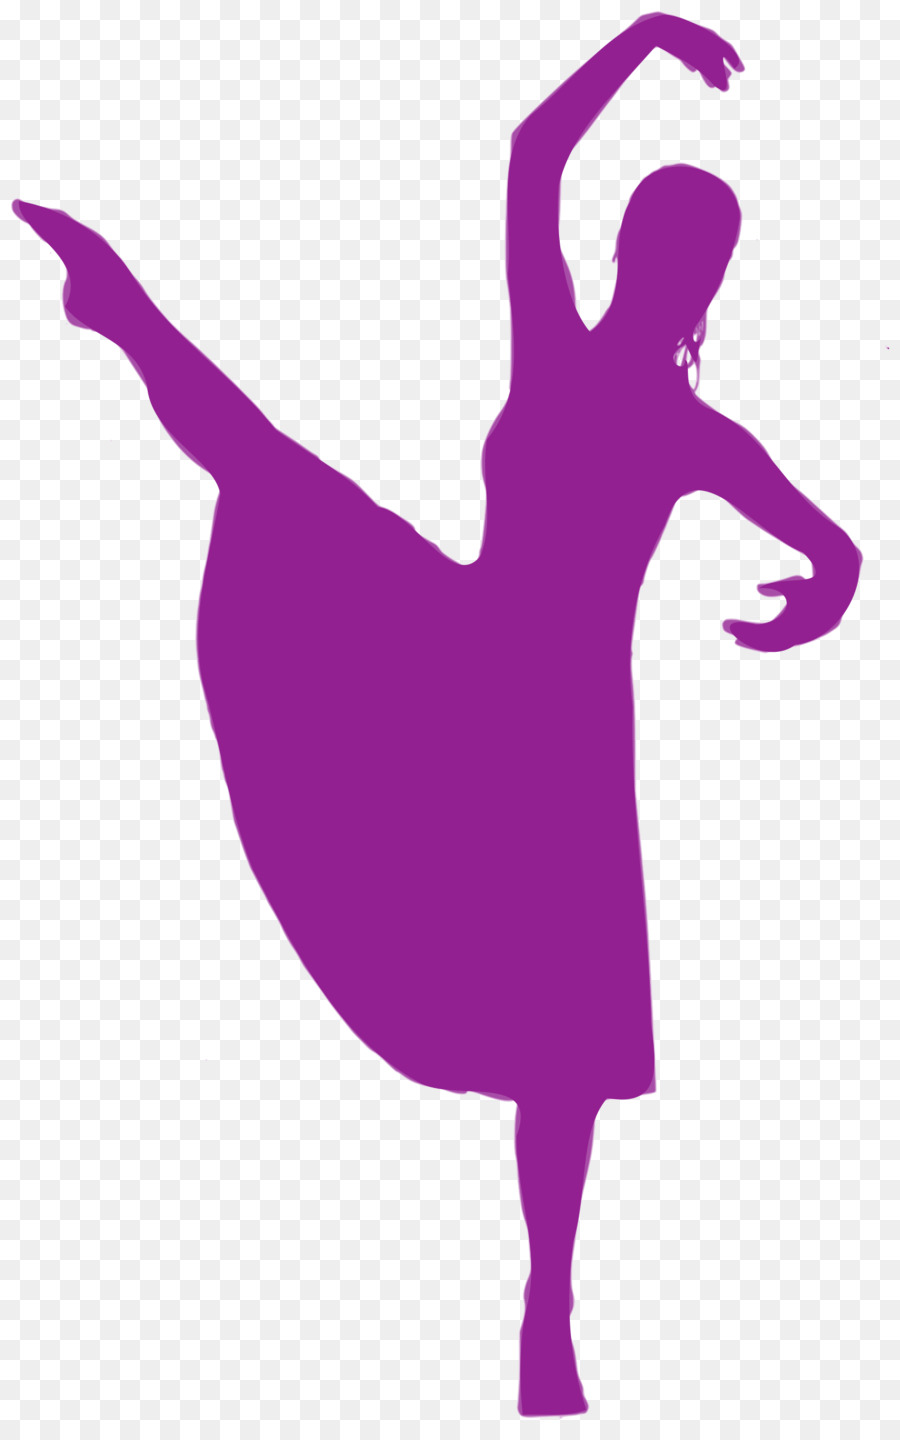 Dance Silhouette Drawing Clip art - Silhouette png download - 1510*2400 - Free Transparent Dance png Download.